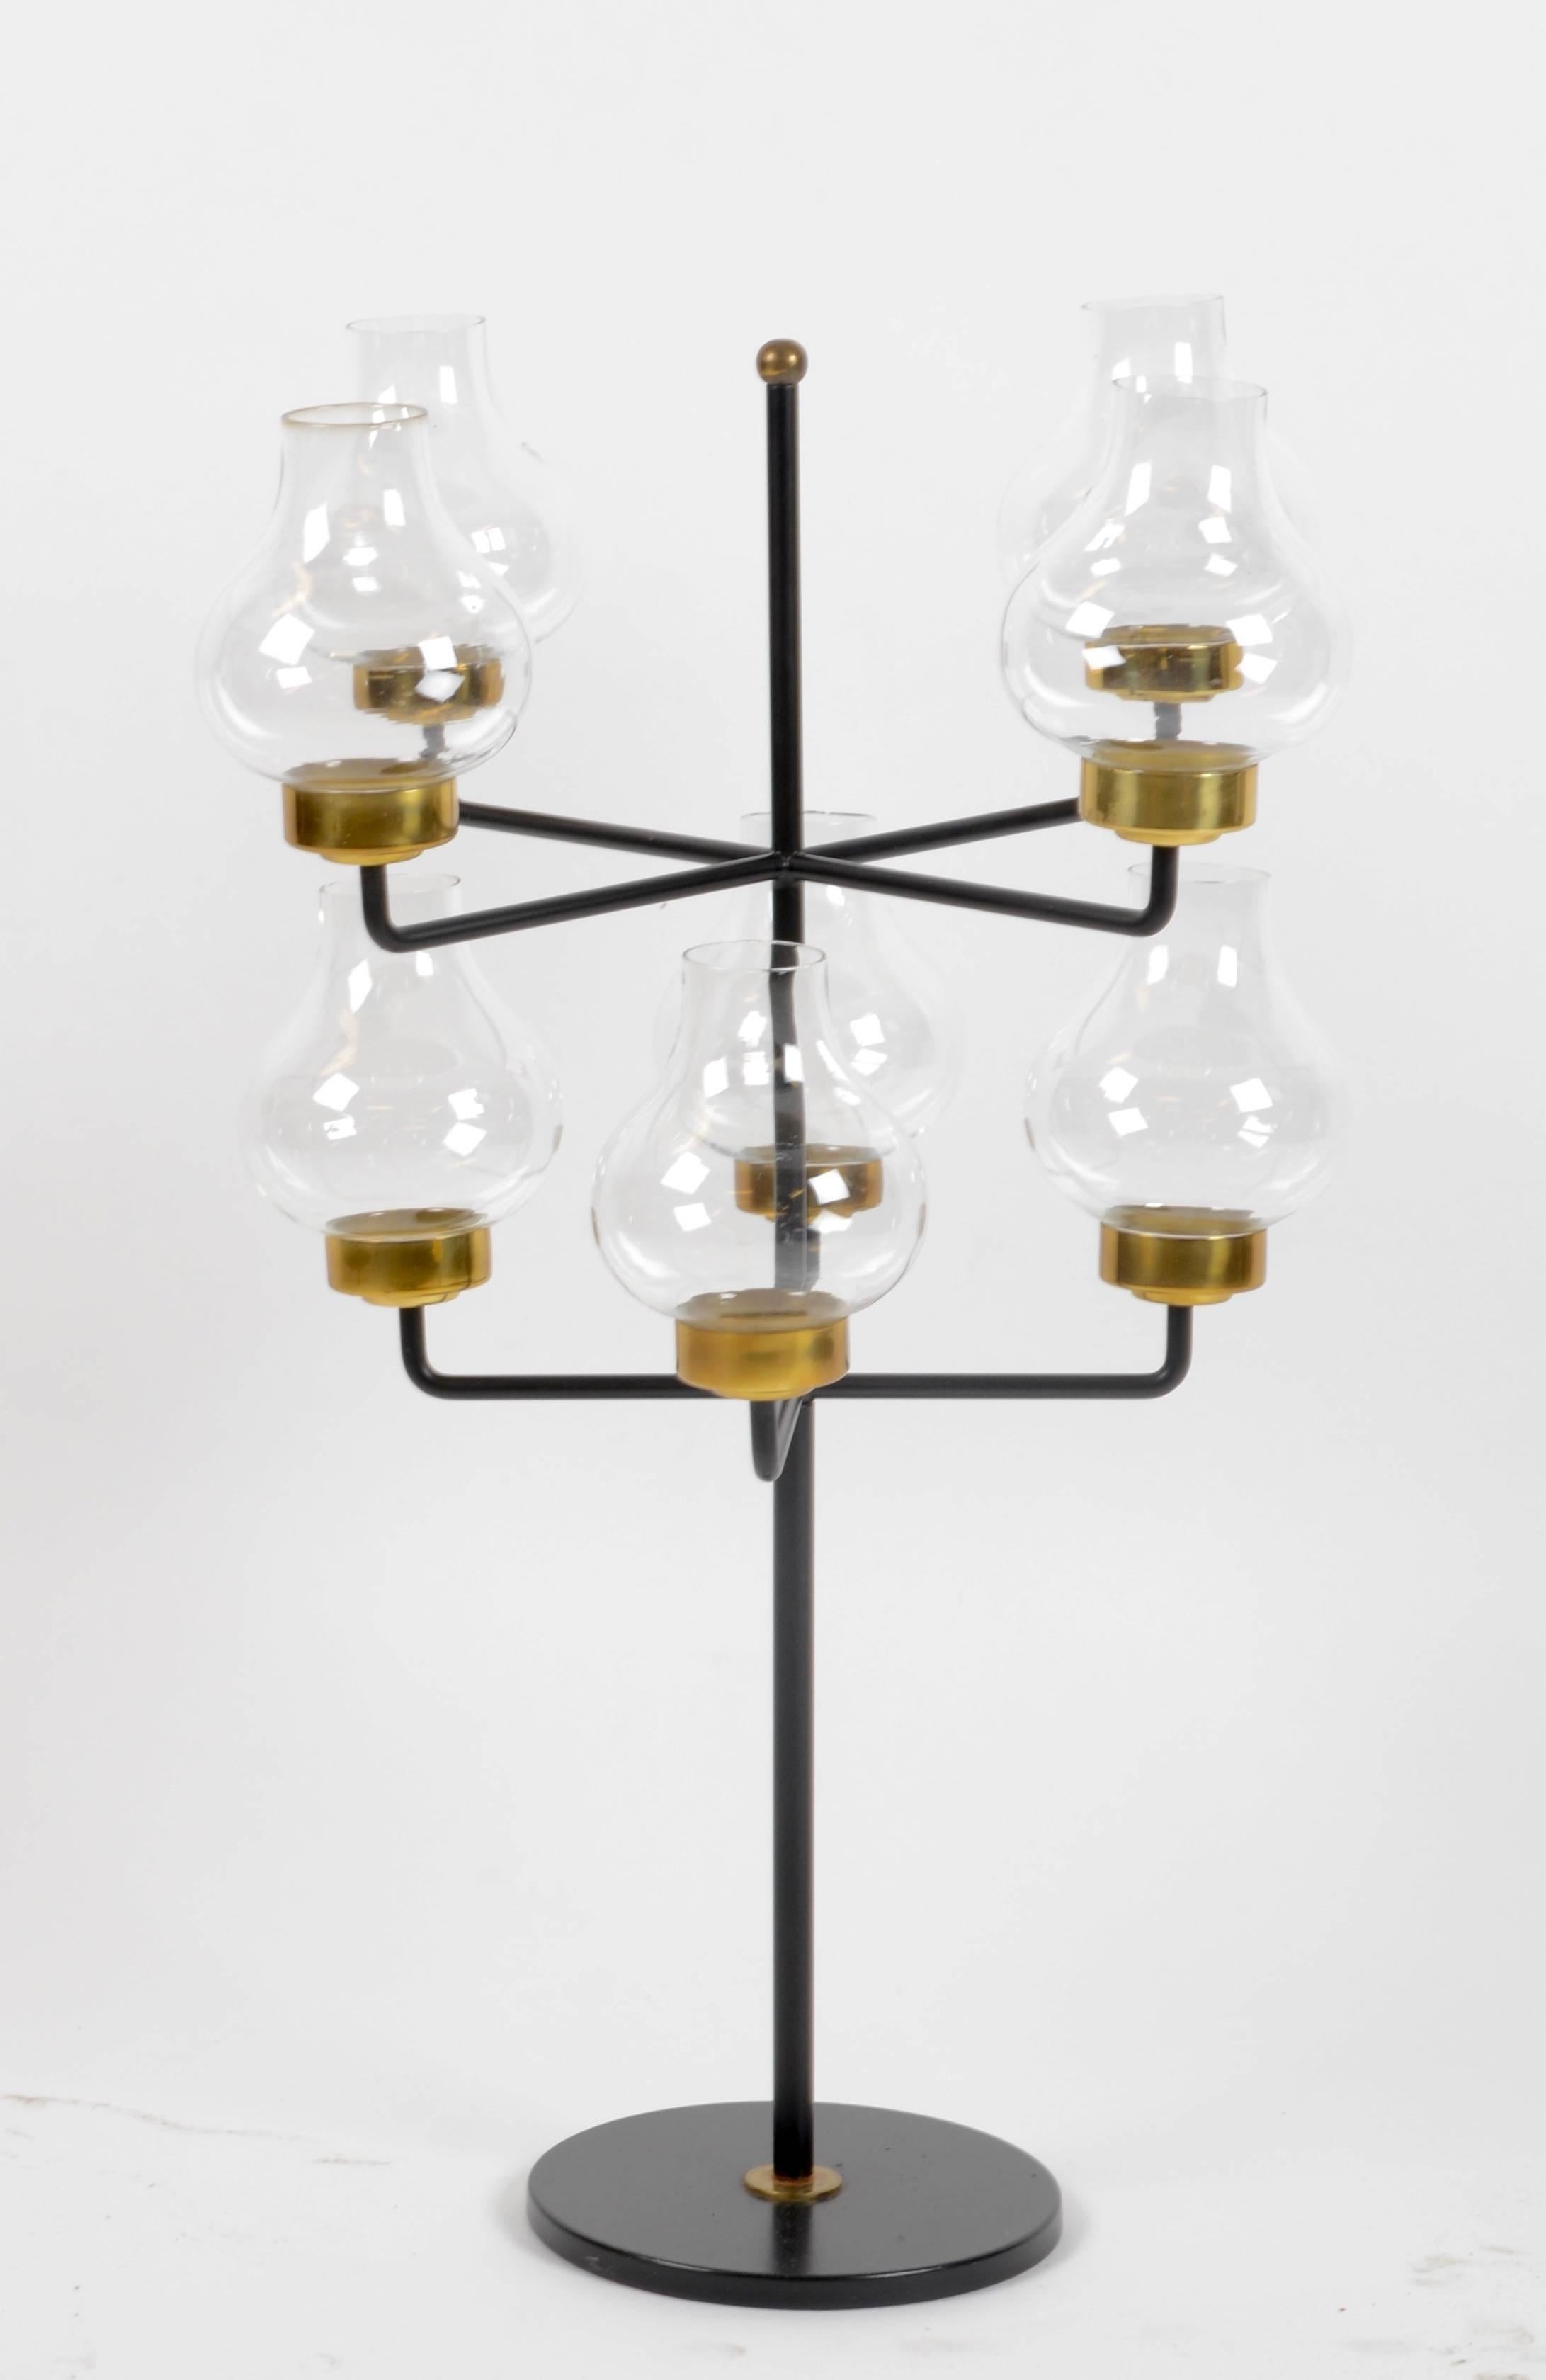 Floor or candle candelabra designed by Hans Bergström for Ateljé Lyktan, Åhus, Sweden, mid-1900s. In brass and lacquered metal. Adjustable height.

Measures: Height 60 / 133 cm.